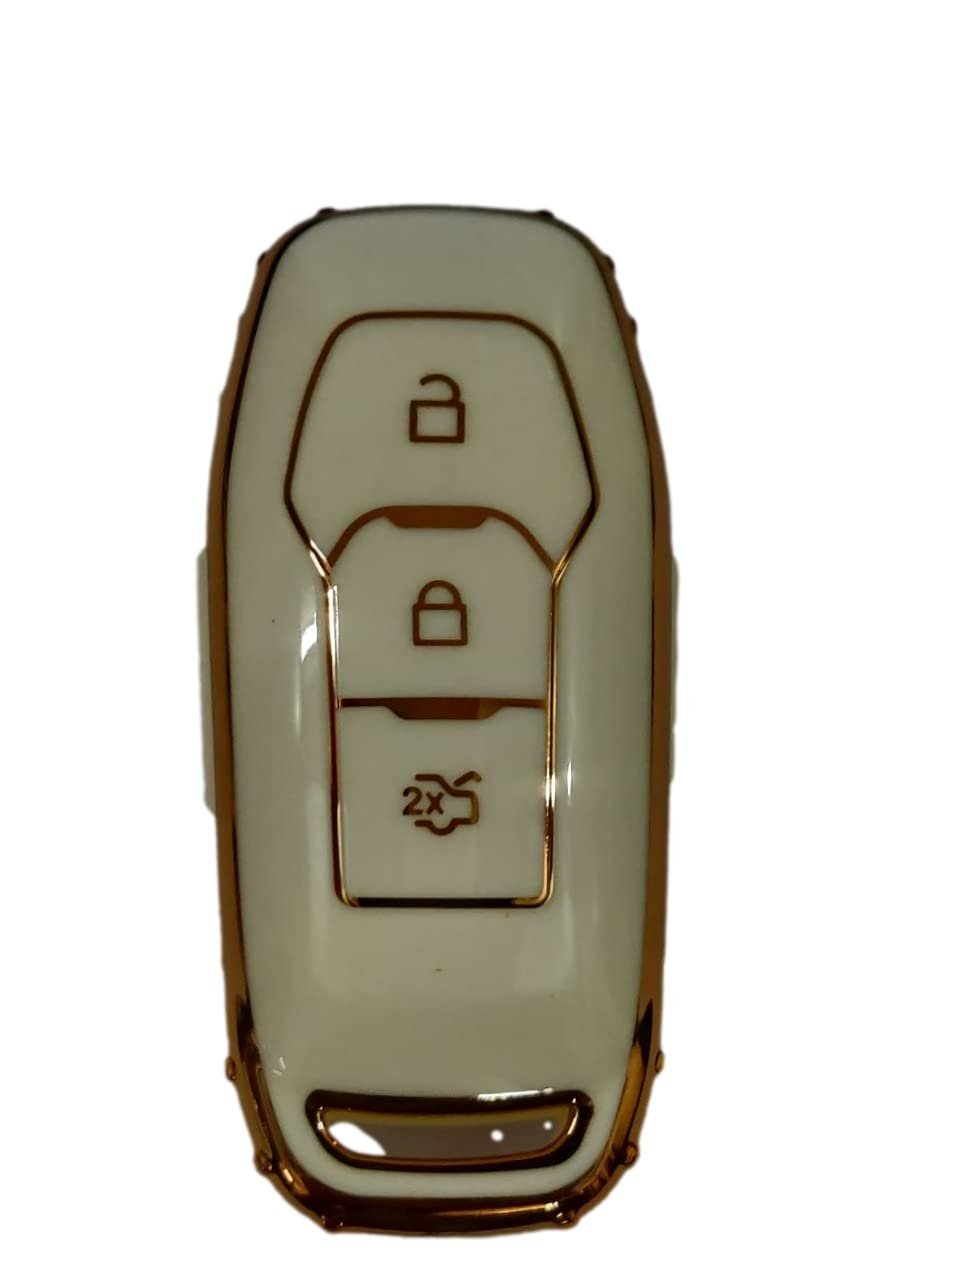 Carbon TPU Key Cover Compatible with Ford Figo Aspire and Ford Endavour Smart Key only(White) Image 